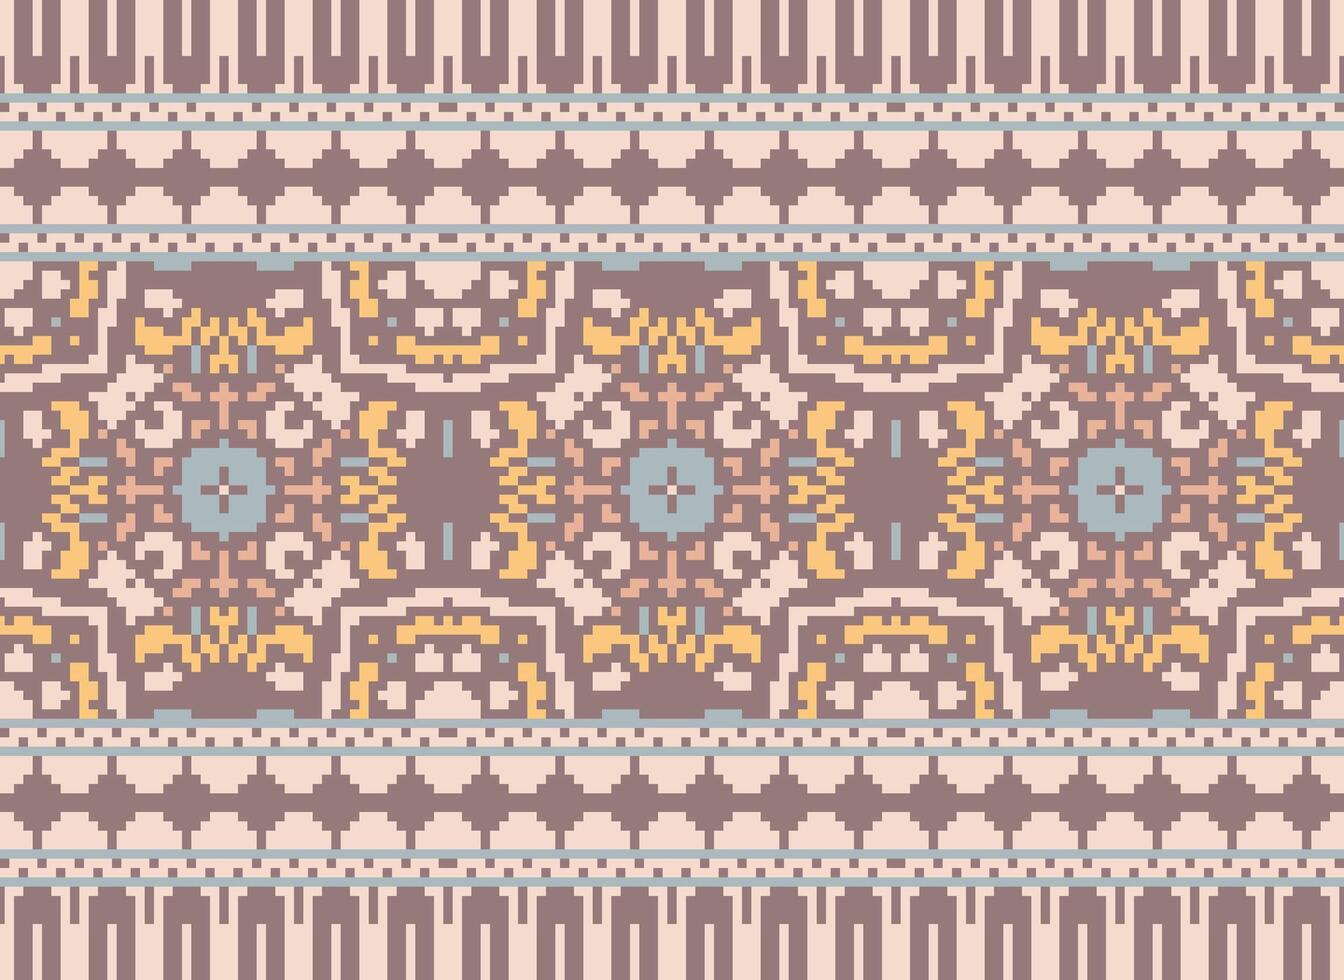 Cross Stitch Border. Embroidery Cross Stitch. Ethnic Patterns. Geometric Ethnic Indian pattern. Native Ethnic pattern.Texture Textile Fabric Clothing Knitwear print. Pixel Horizontal Seamless Vector. vector